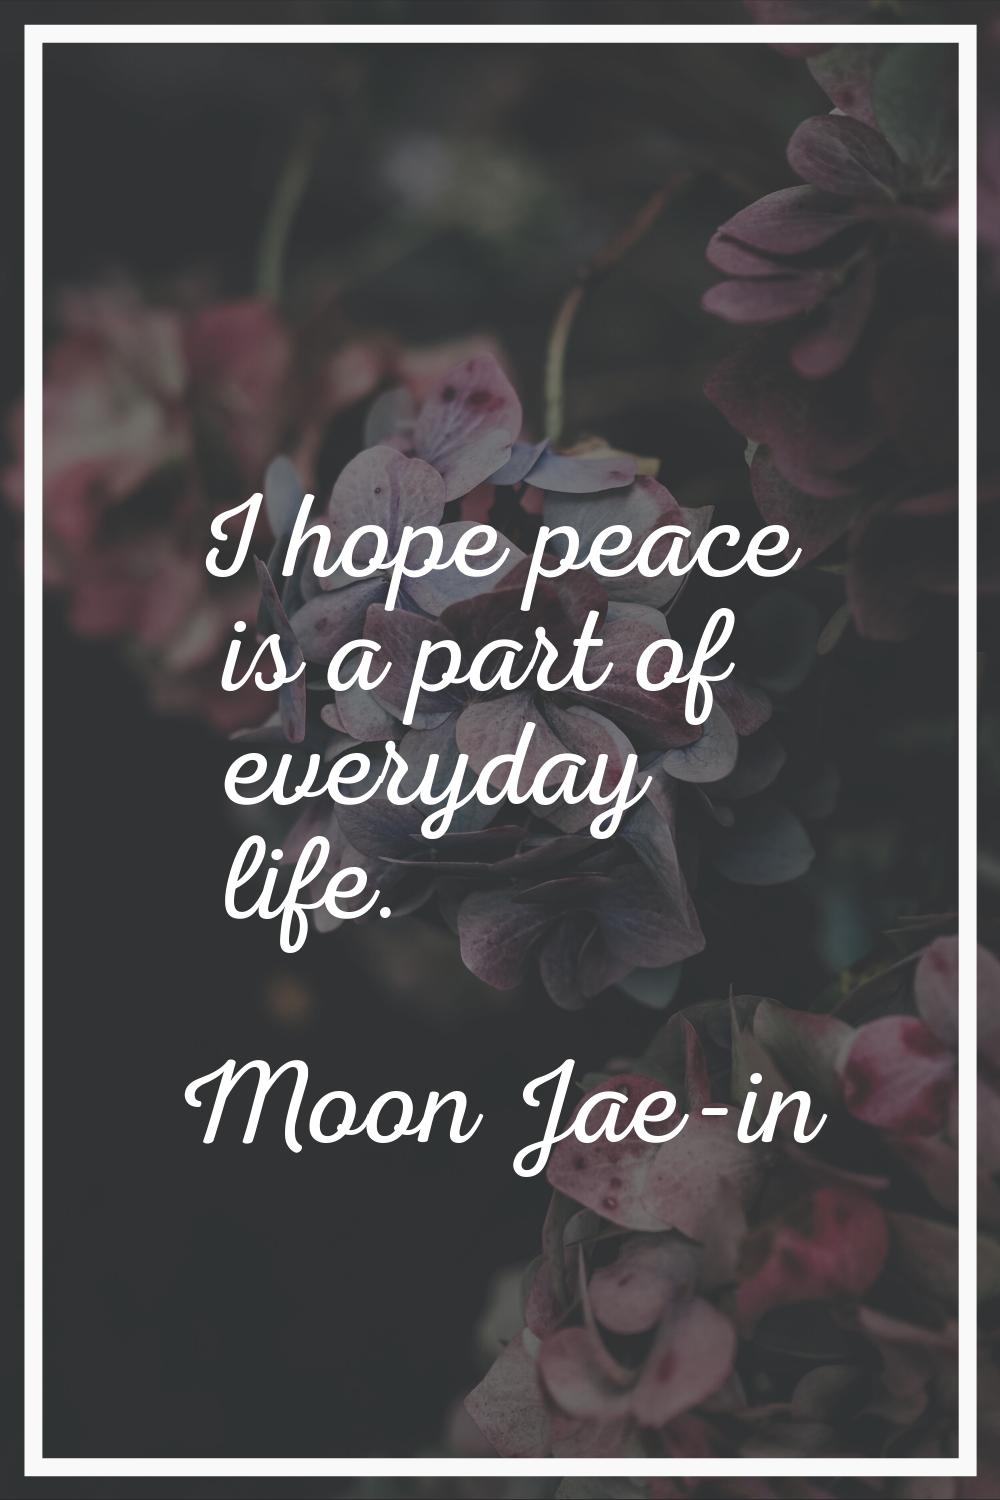 I hope peace is a part of everyday life.